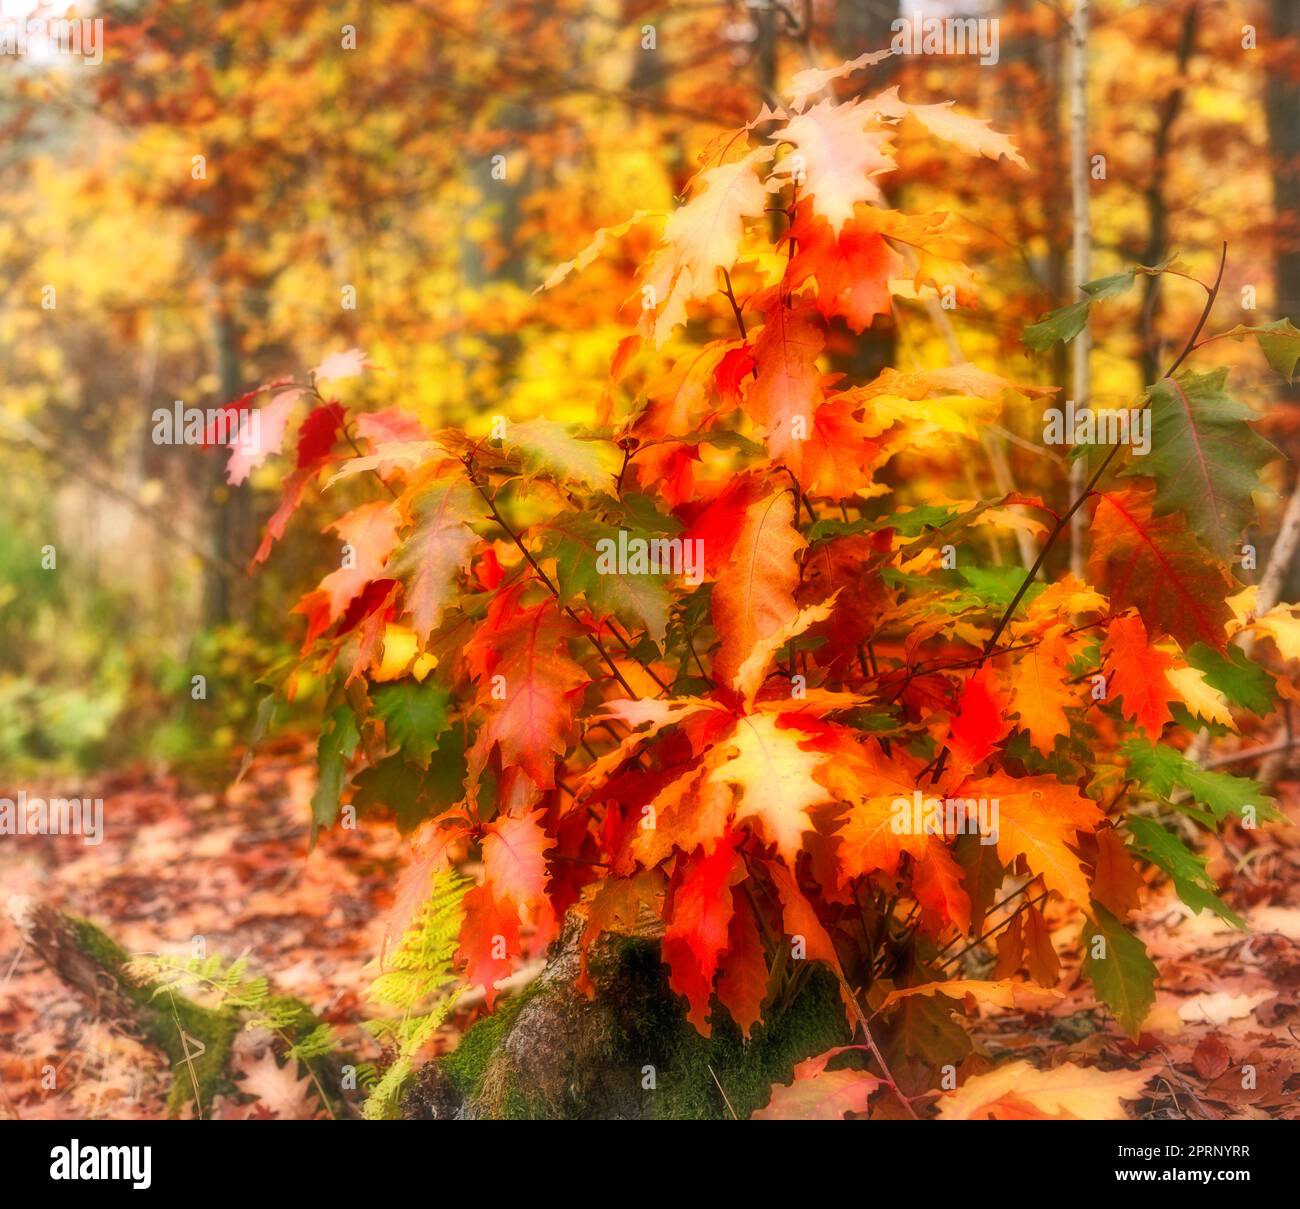 The colors of autumn - Marselisborg Forests. Marselisborg Forests or simply Marselisborg Forest, is a 1,300 hectares forest to the south of Aarhus City in Denmark. Stock Photo